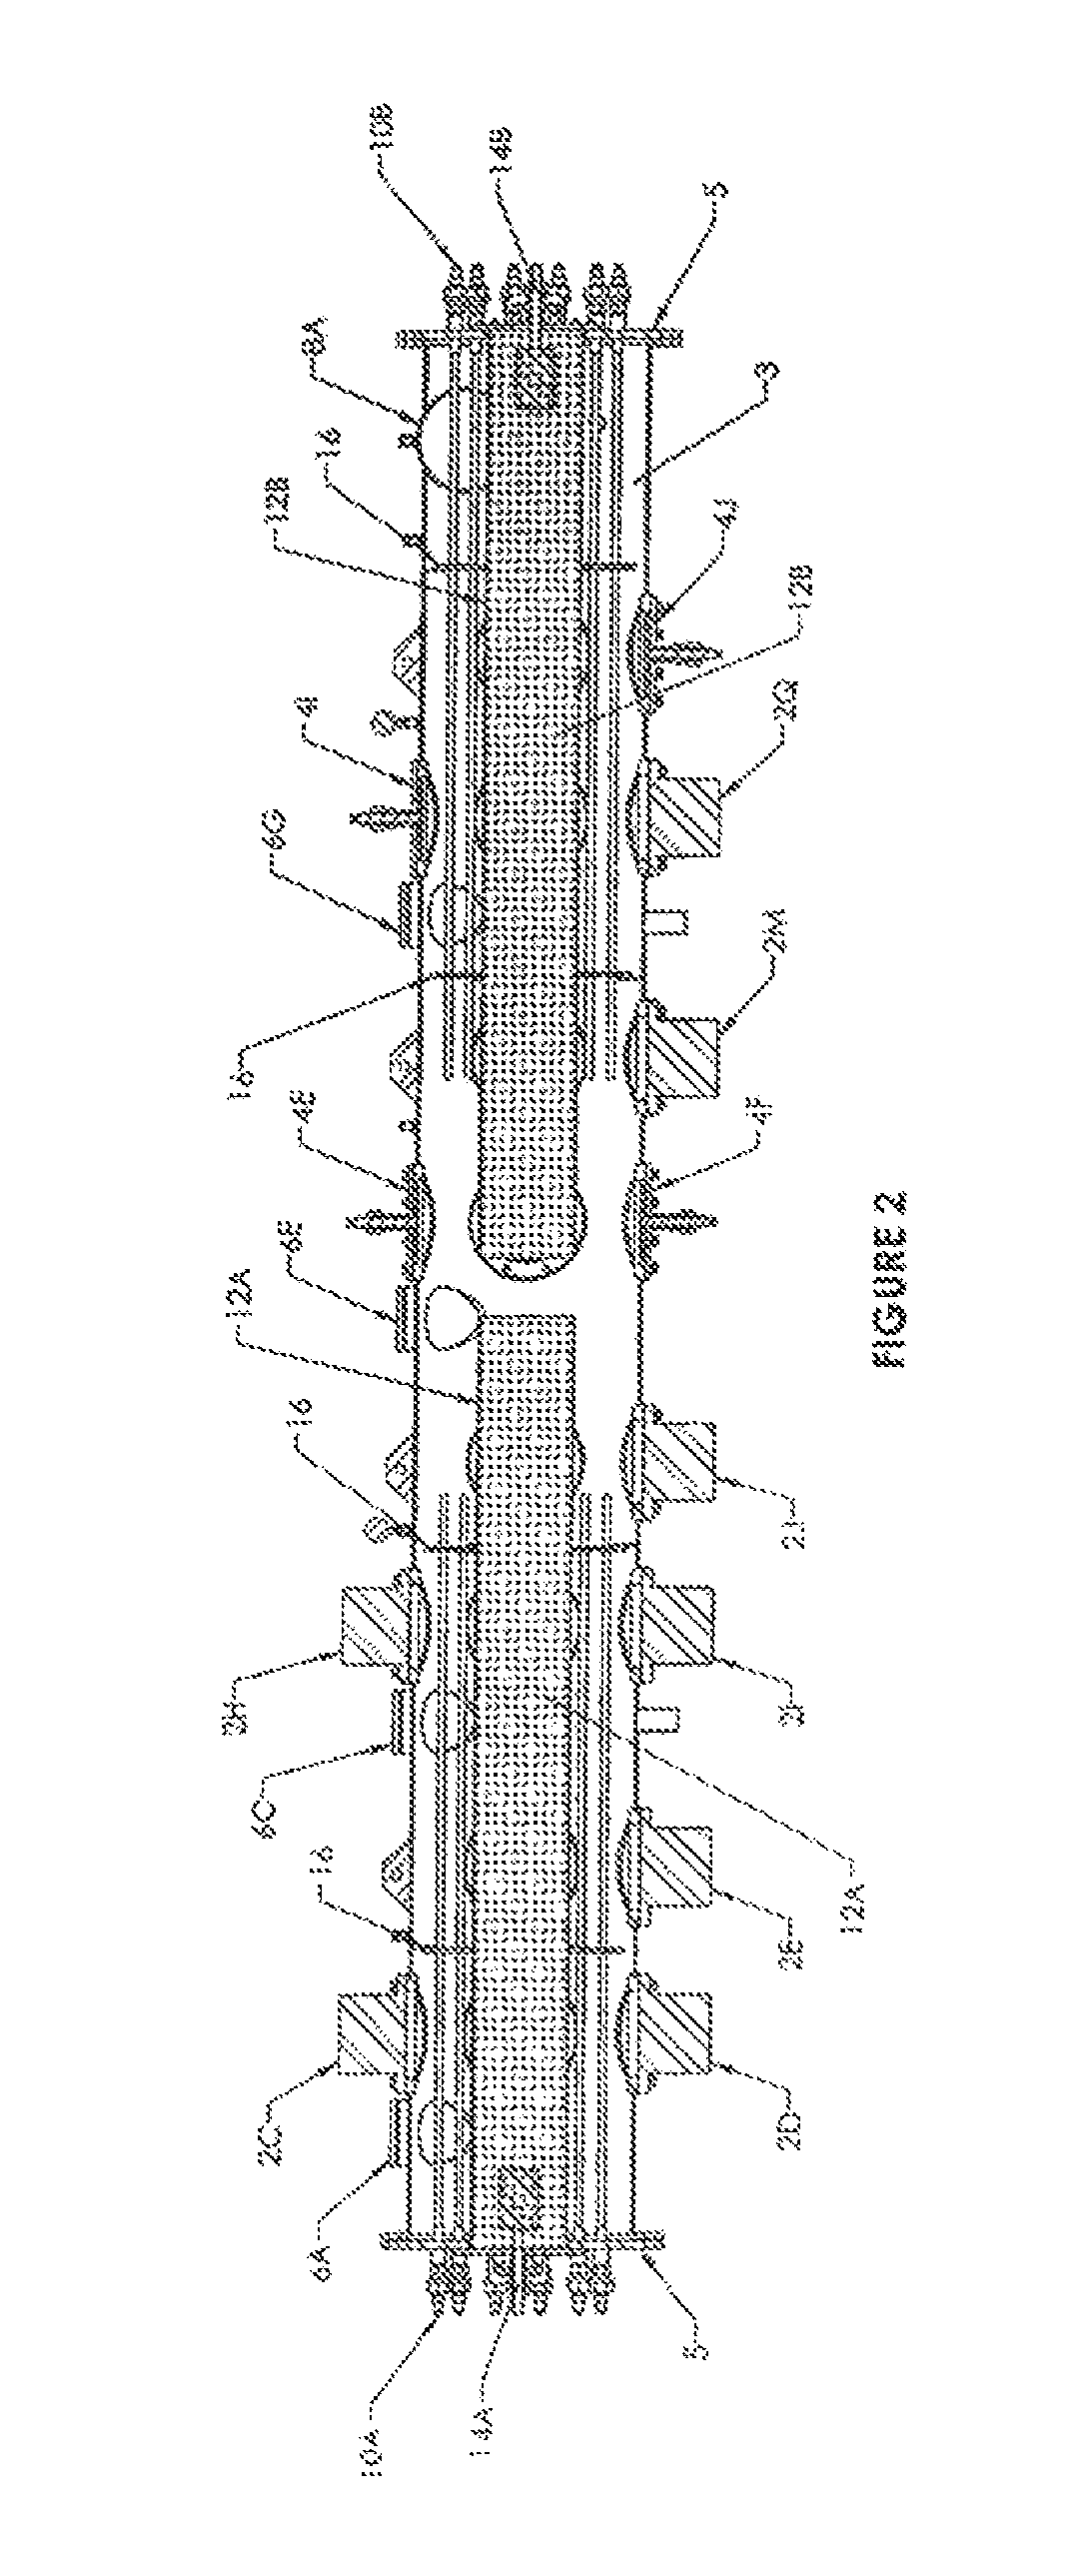 Apparatus for treating fluids